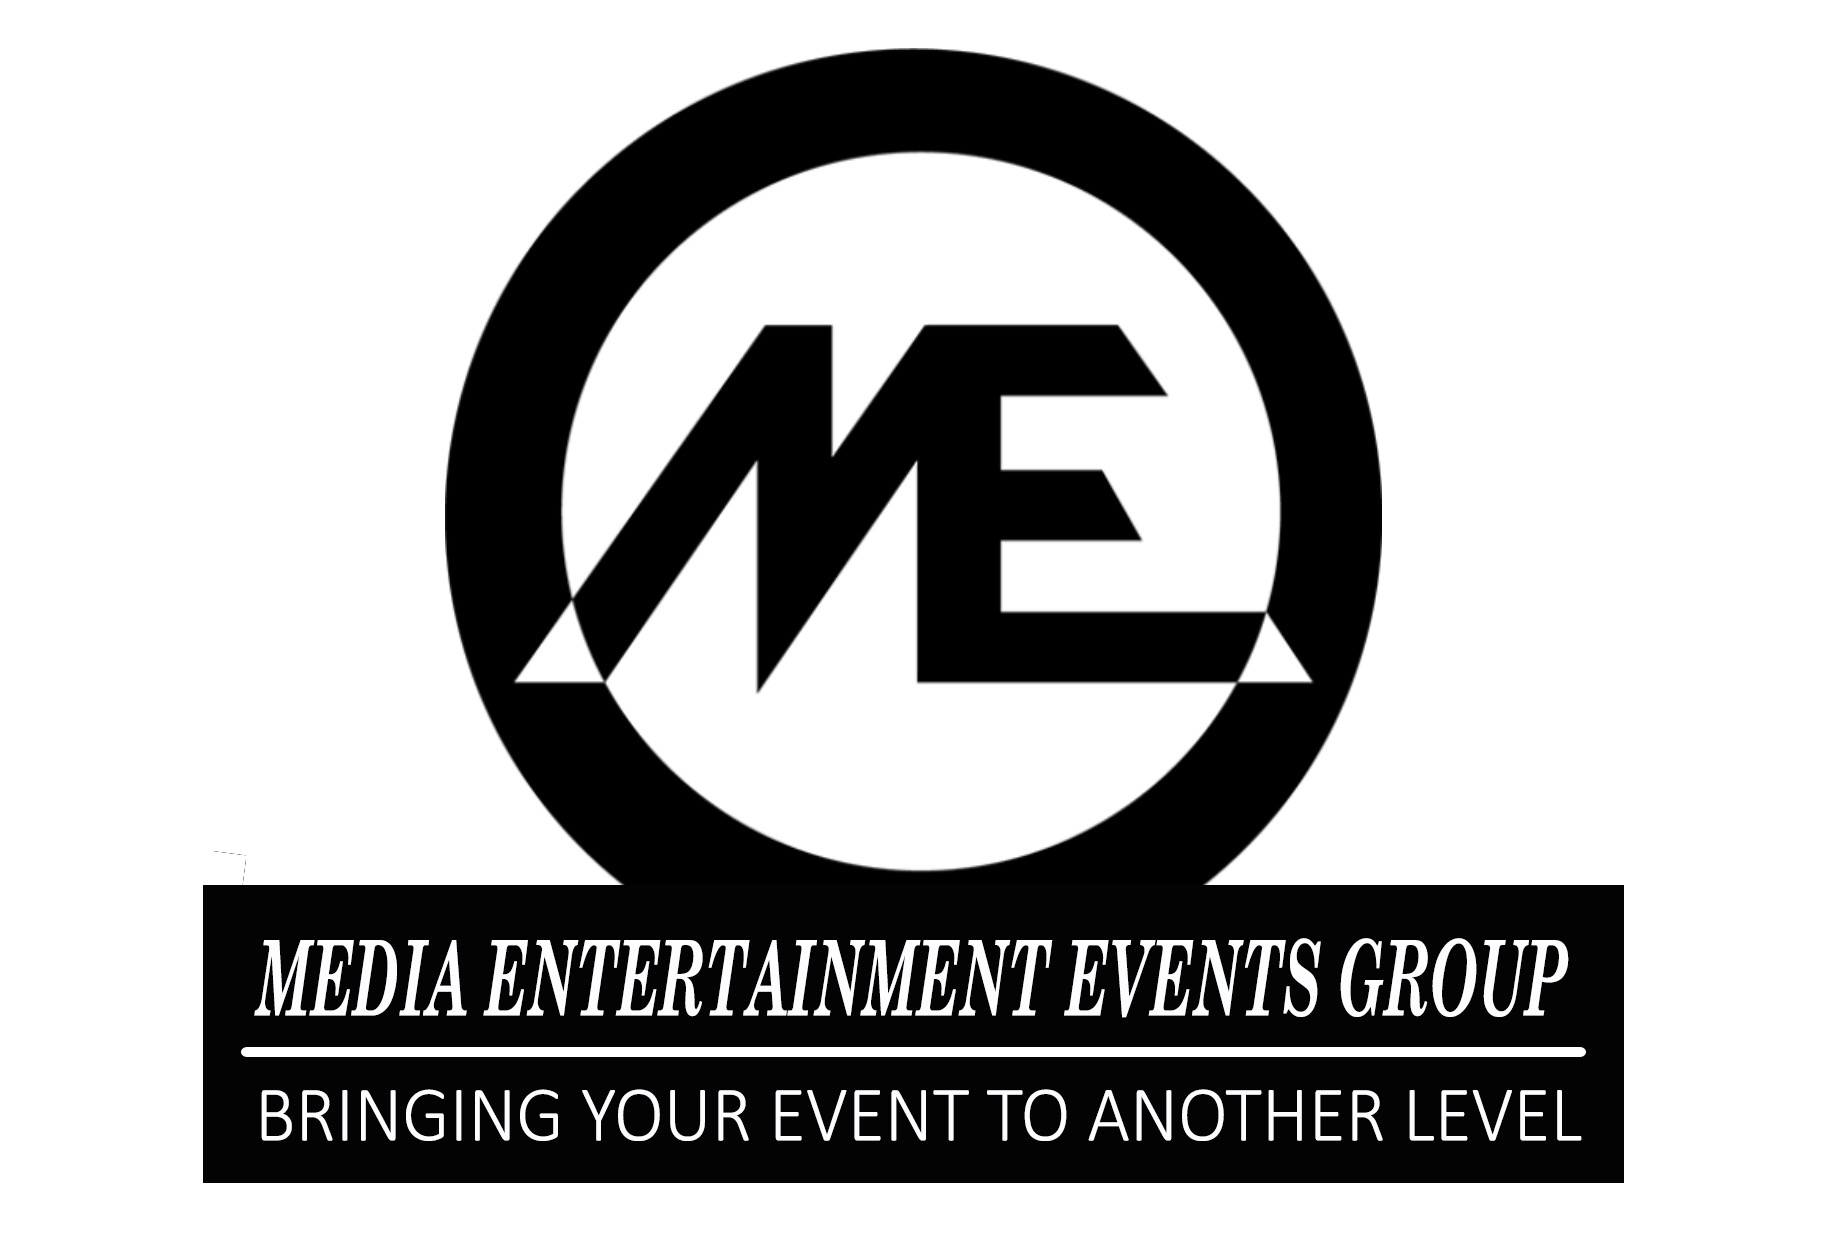 Media Entertainment Events Group